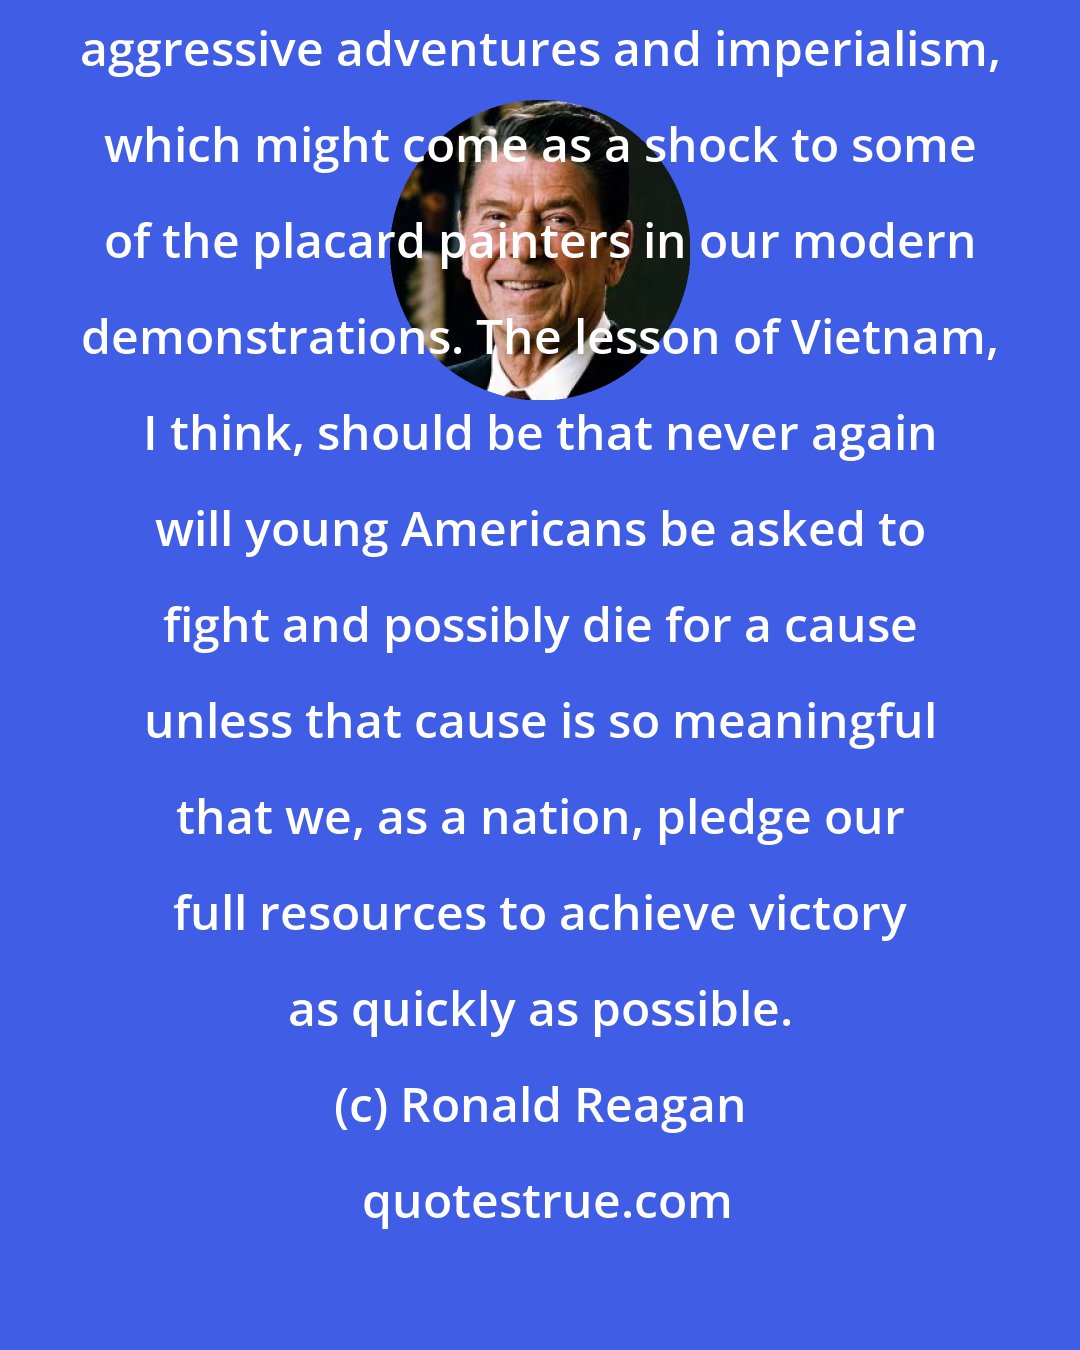 Ronald Reagan: We are not a warlike people. Nor is our history filled with tales of aggressive adventures and imperialism, which might come as a shock to some of the placard painters in our modern demonstrations. The lesson of Vietnam, I think, should be that never again will young Americans be asked to fight and possibly die for a cause unless that cause is so meaningful that we, as a nation, pledge our full resources to achieve victory as quickly as possible.